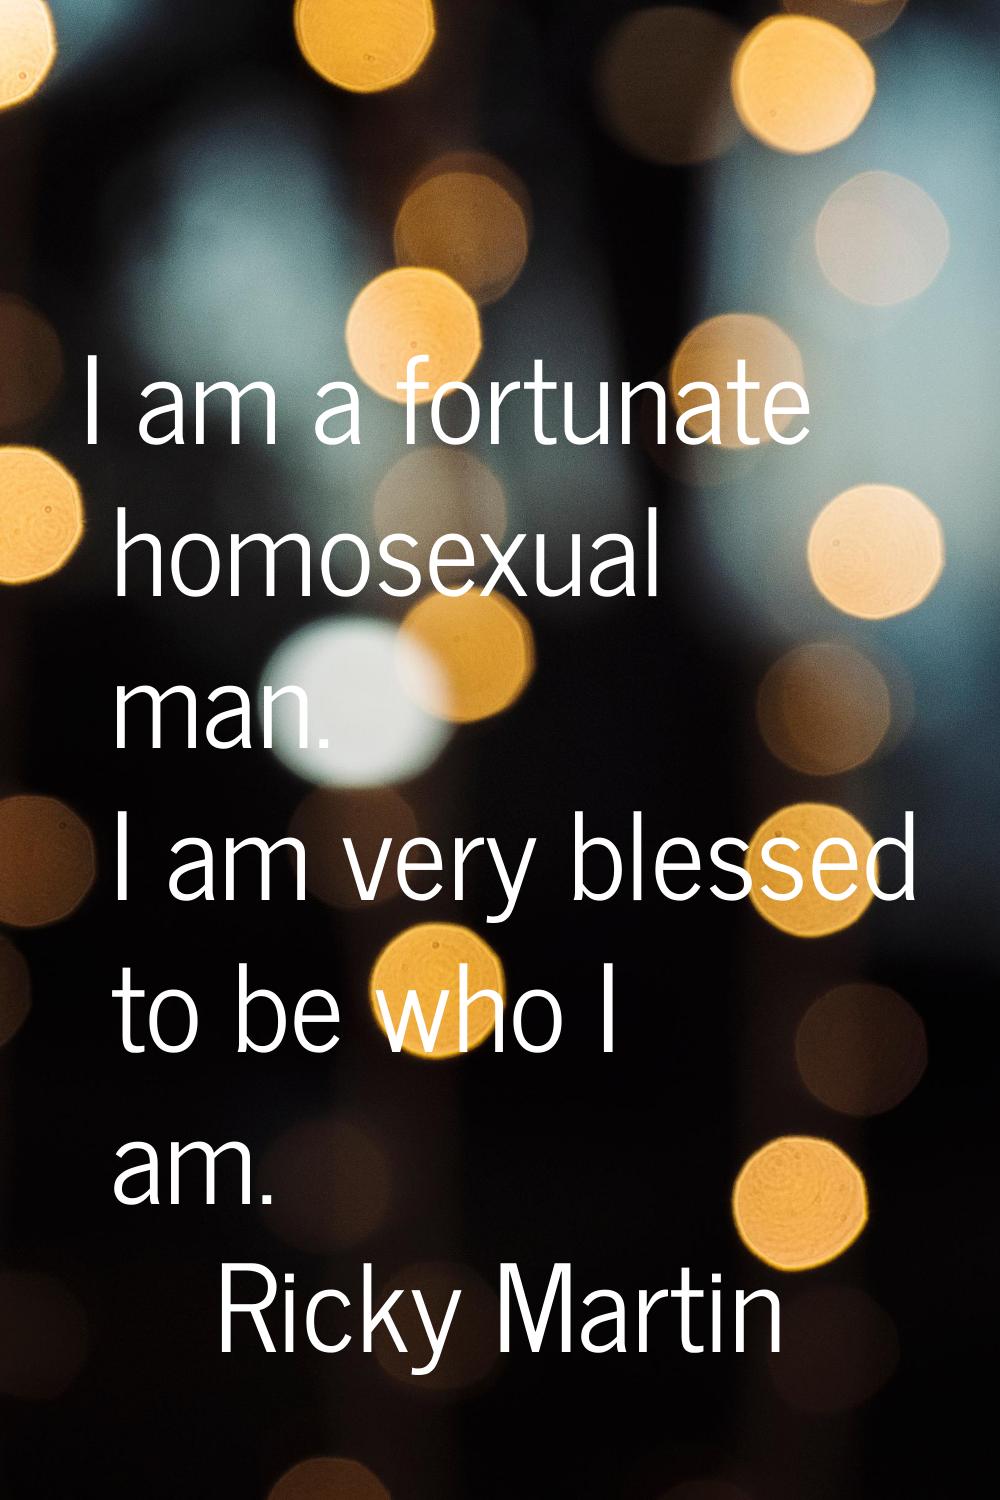 I am a fortunate homosexual man. I am very blessed to be who I am.